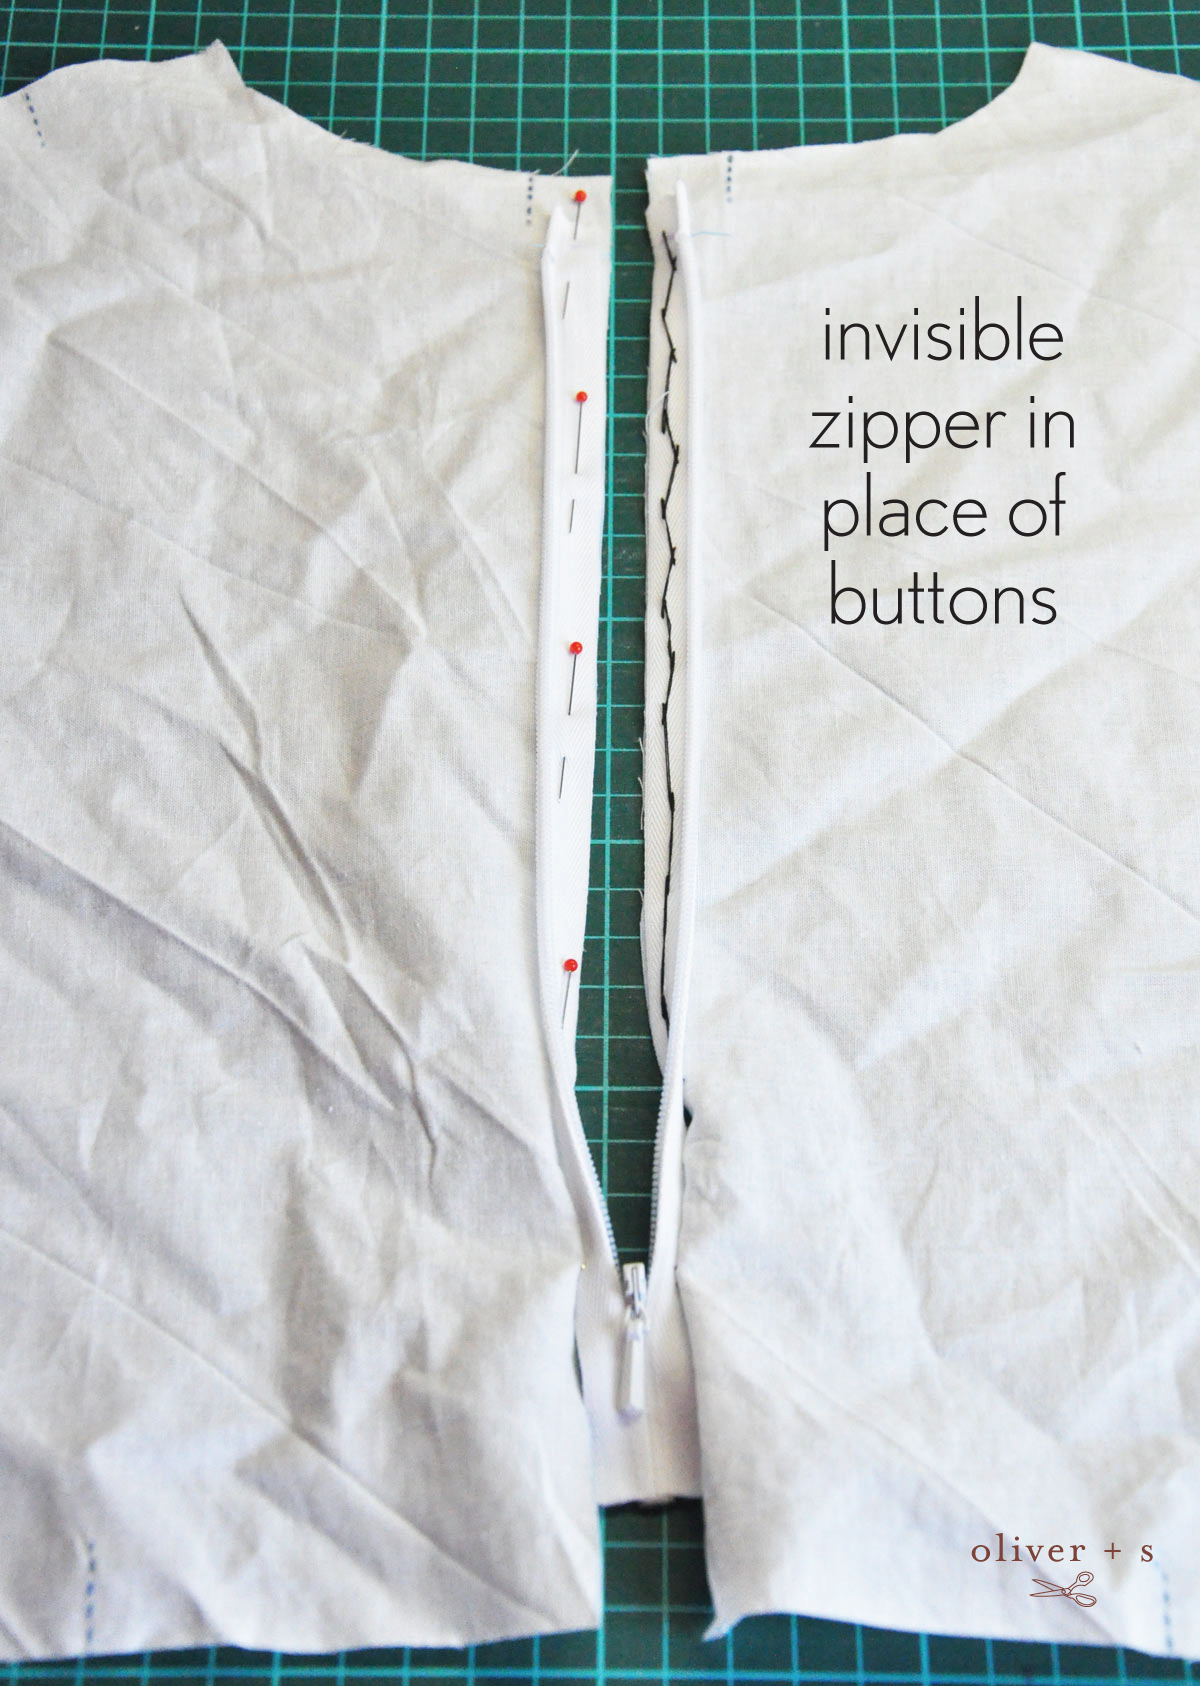 special finish at top of invisible zipper